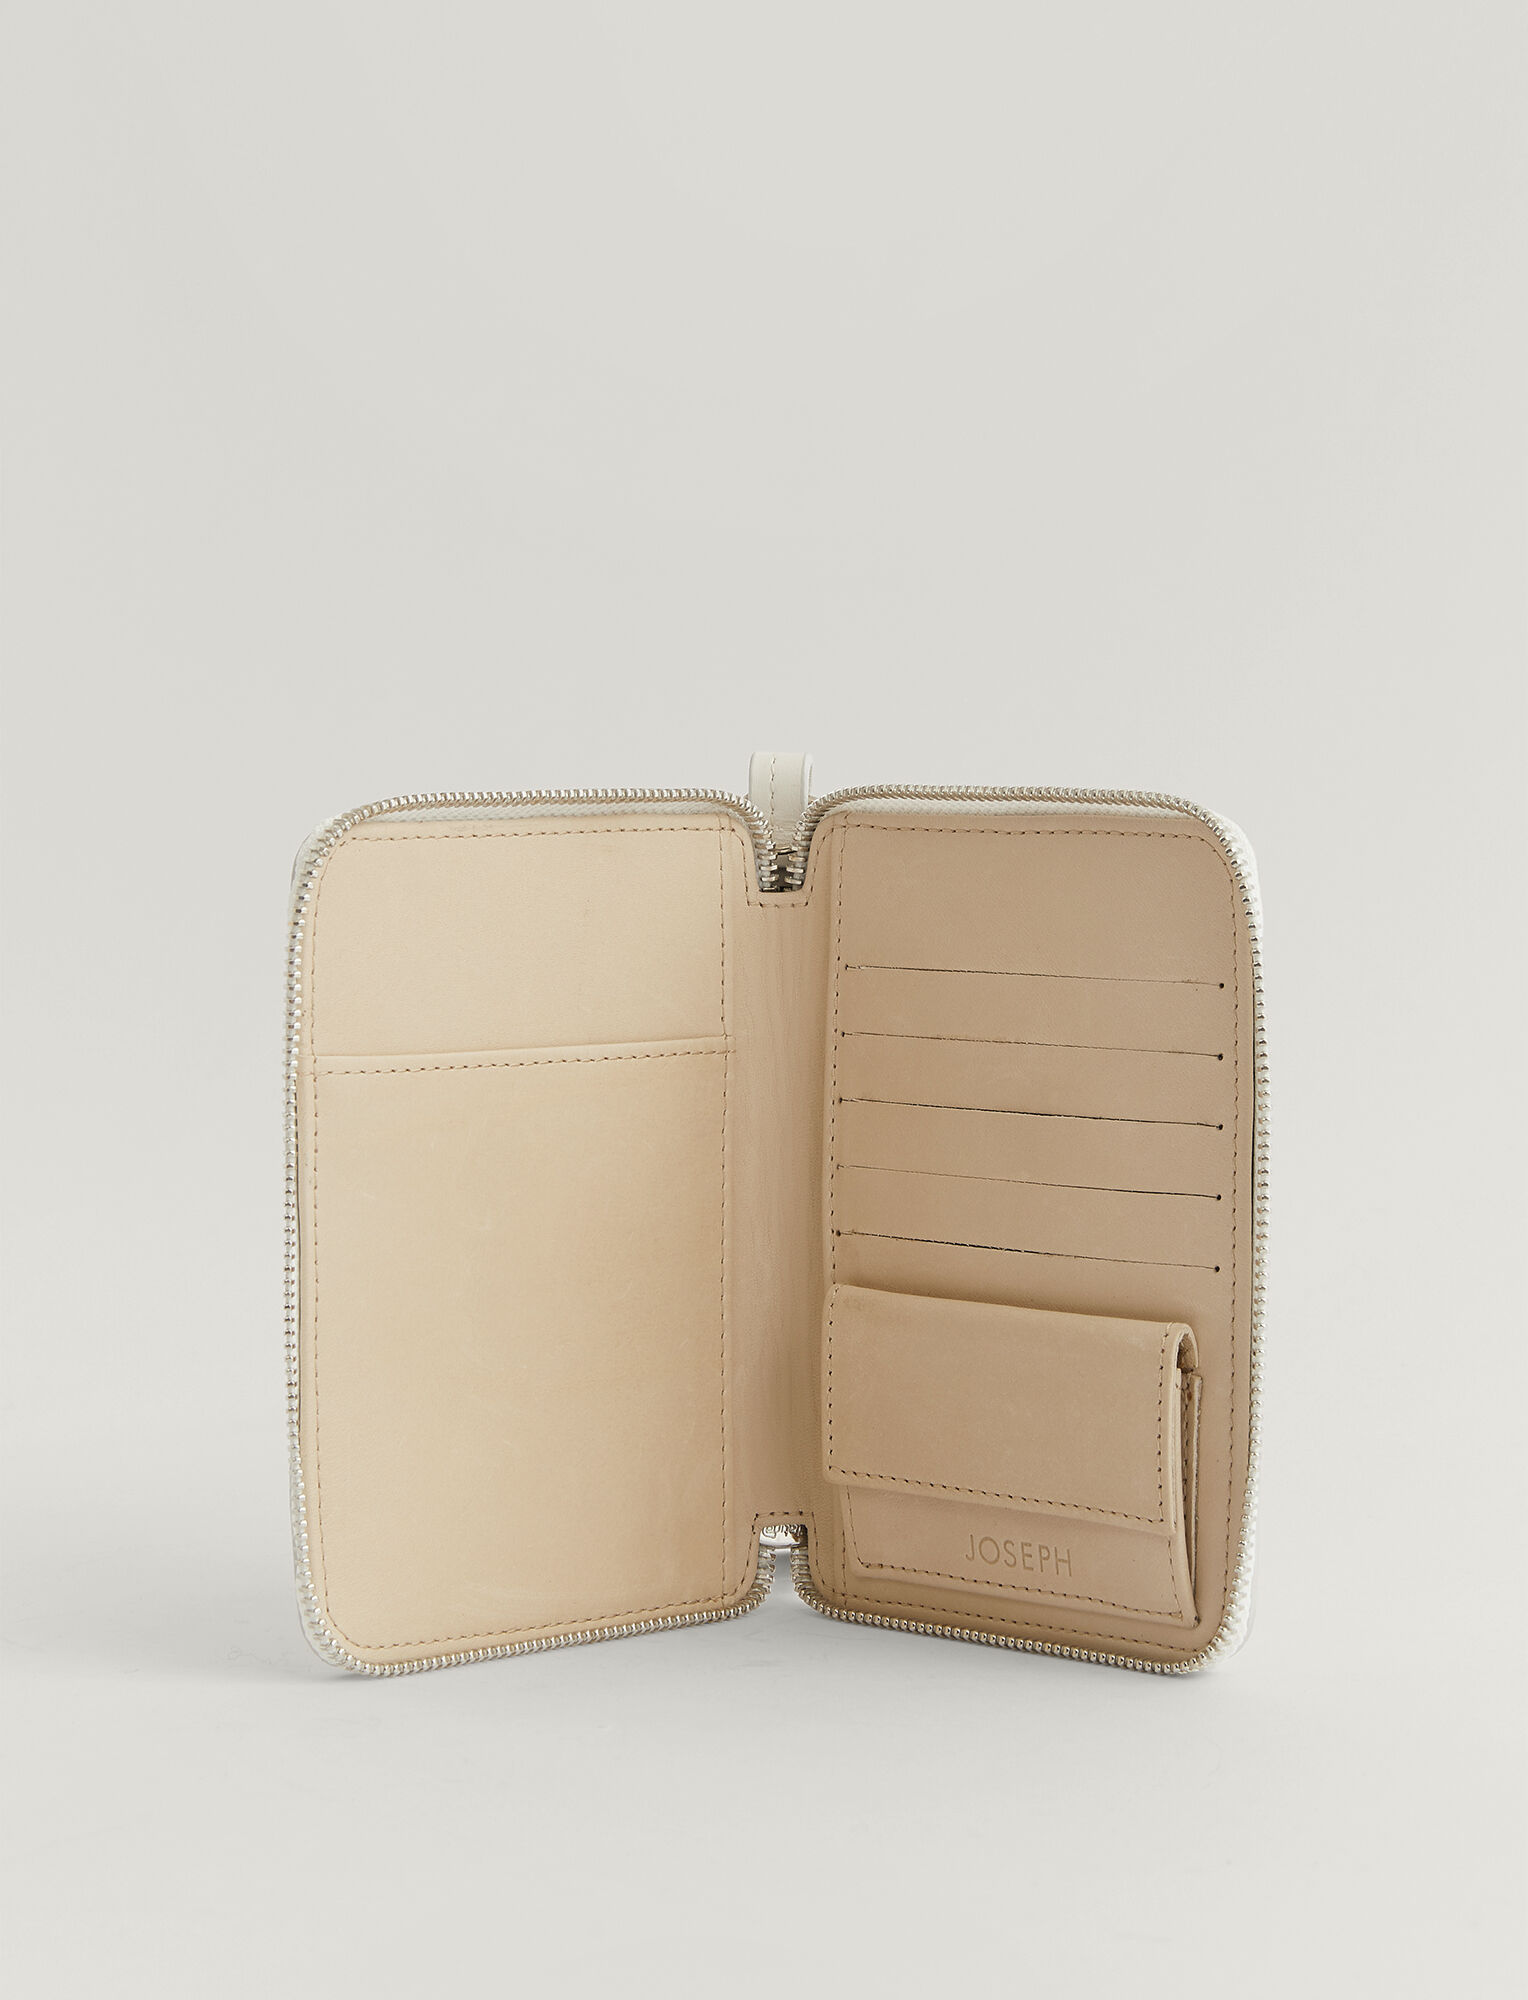 Joseph, Leather Strap Zip Wallet, in OFF WHITE